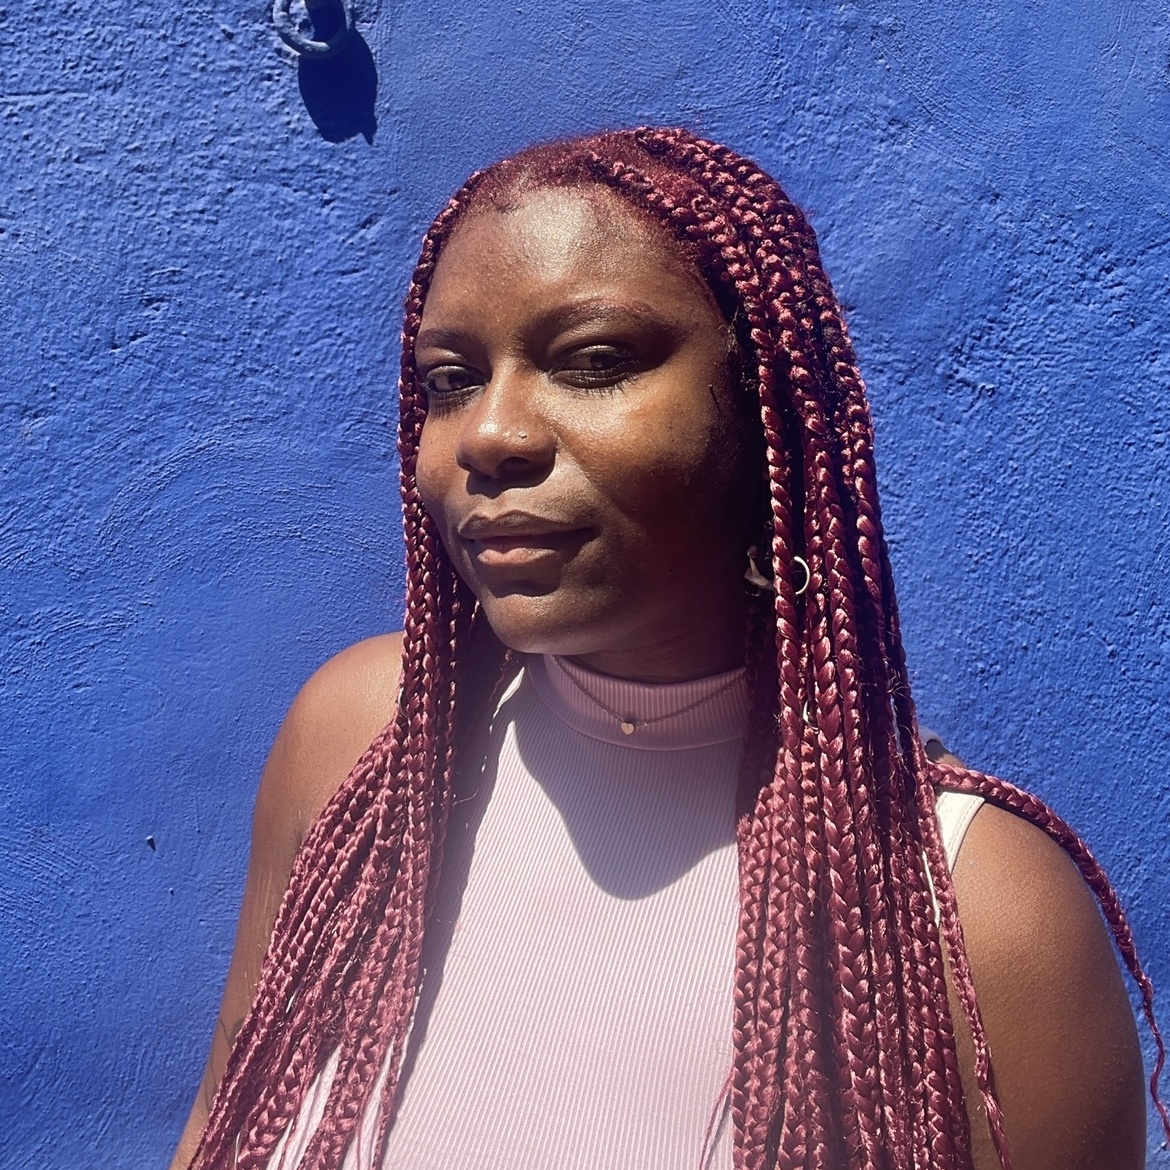 Edgie stands against a blue wall. She has long pink braids and a pink sleeveless turtleneck